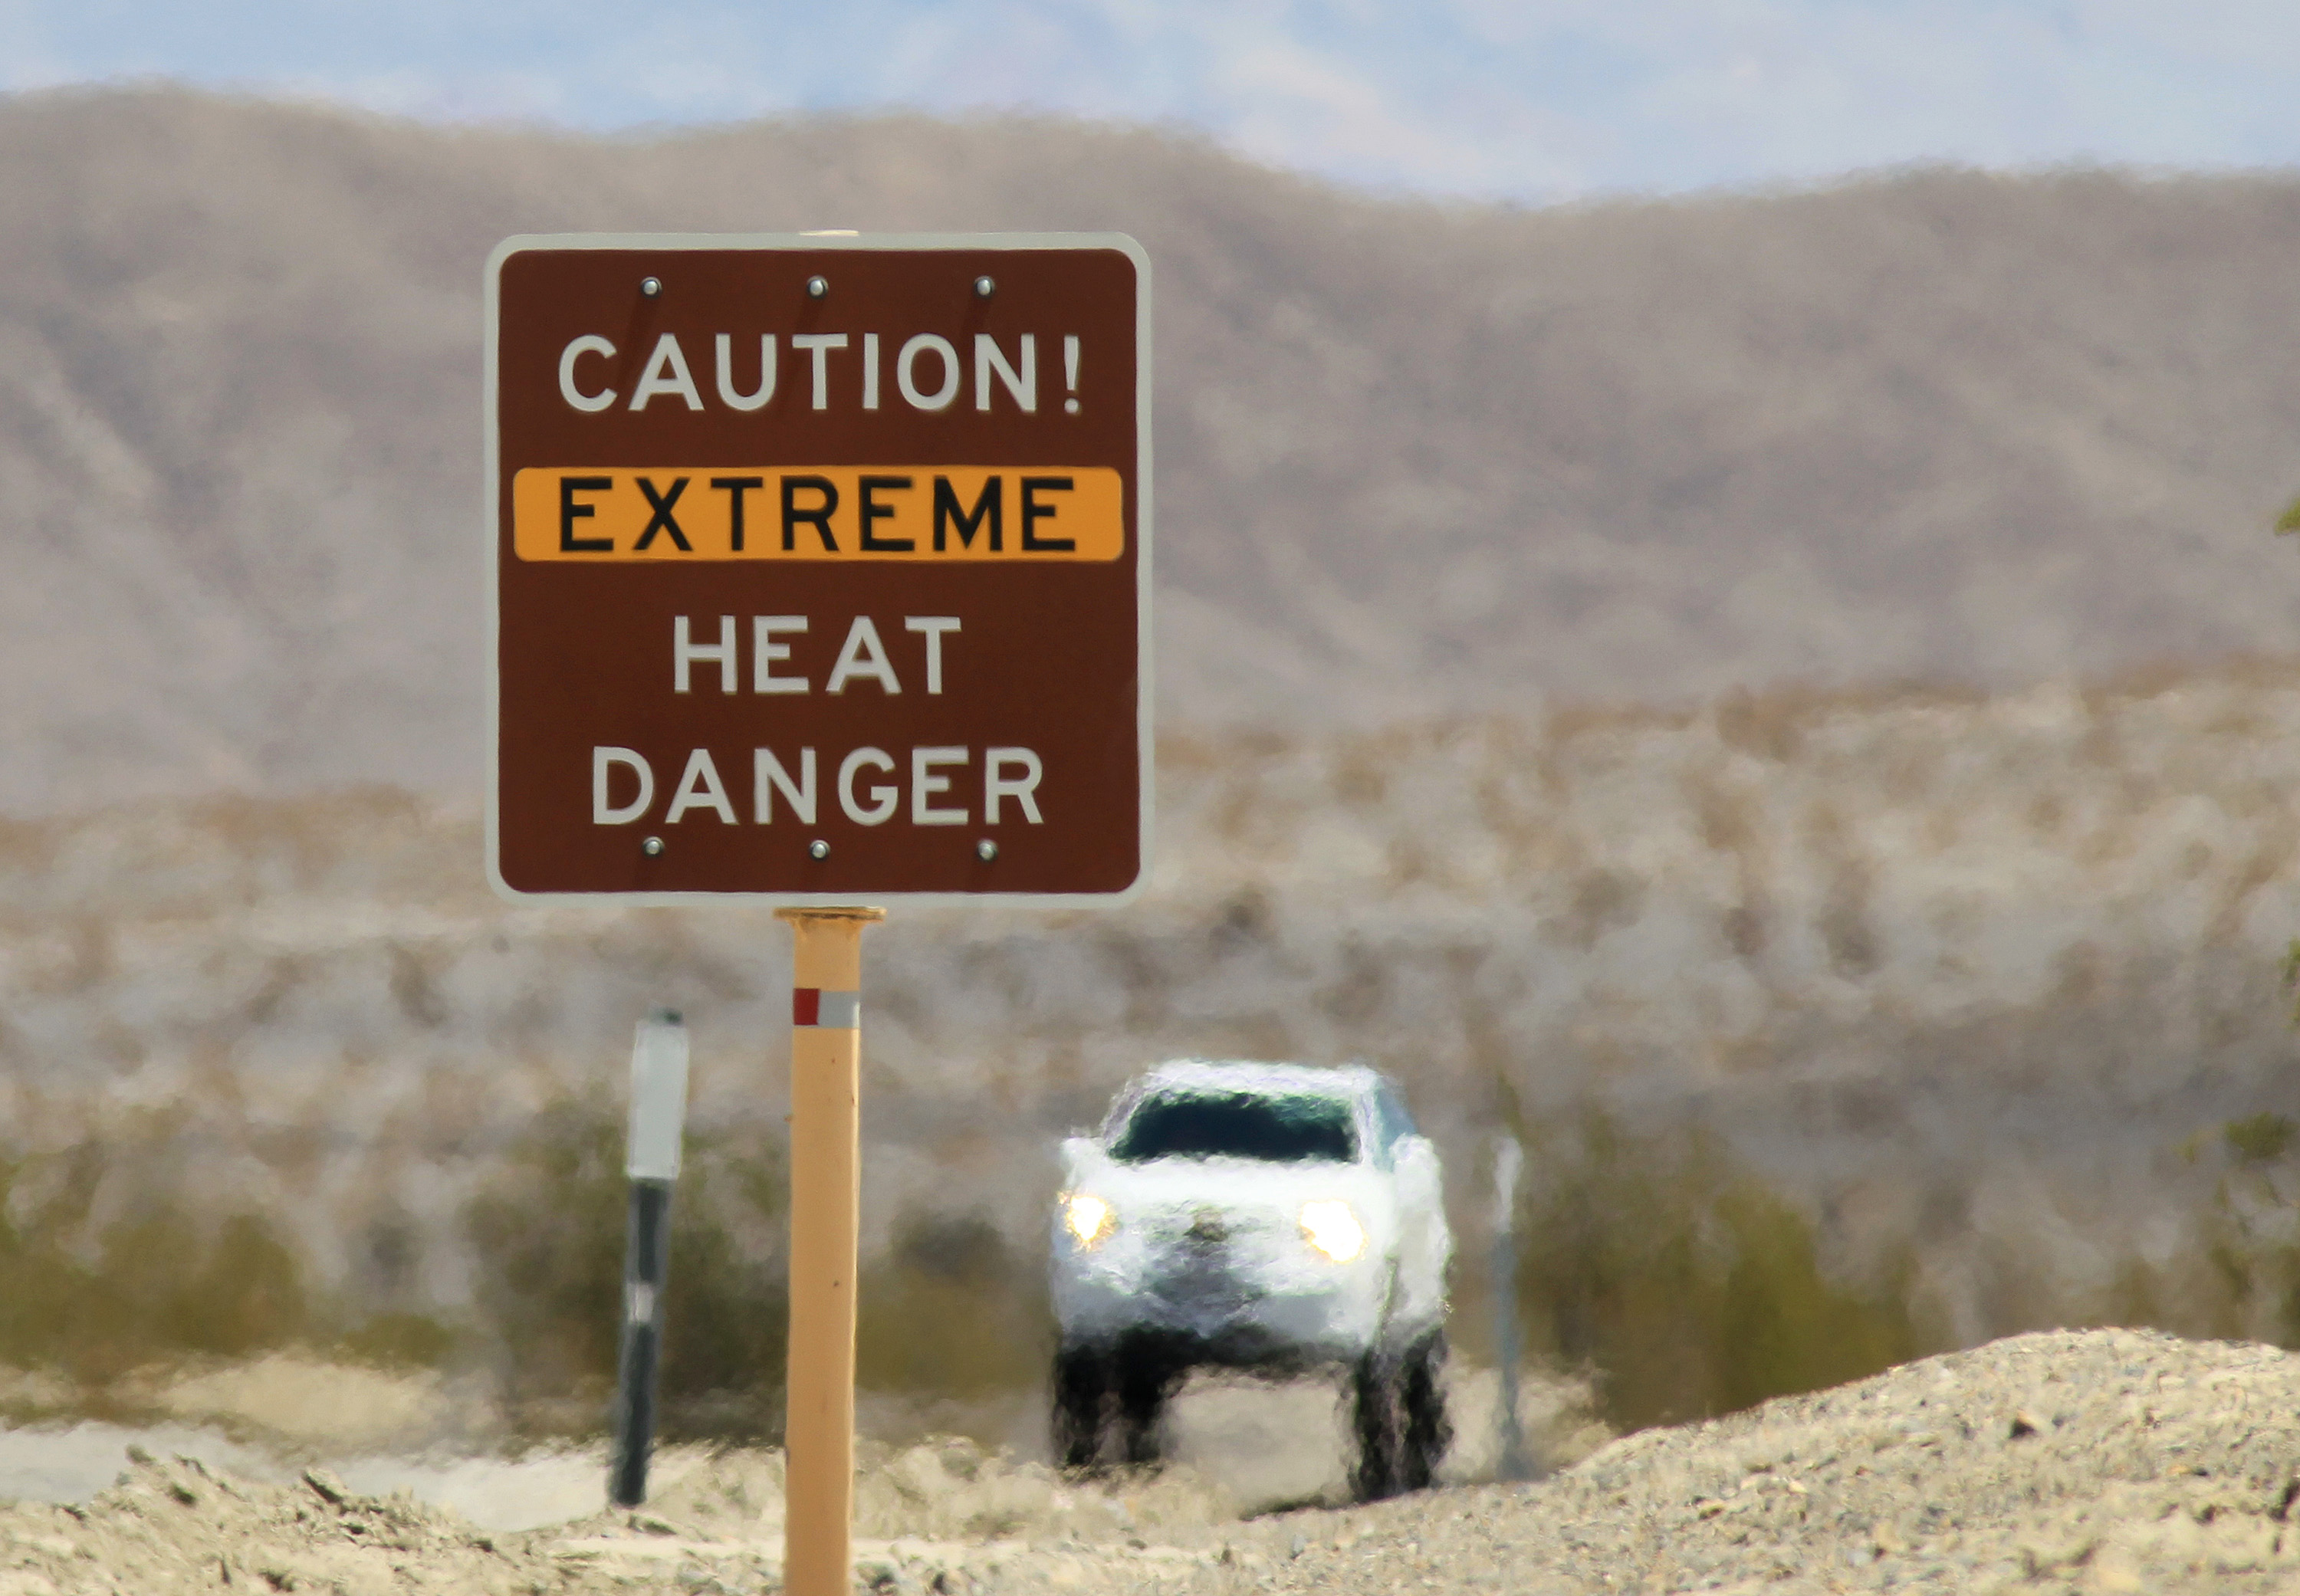 DEATH VALLEY NATIONAL PARK, CA JULY 14:  Heat waves rise near a heat danger warning sign on the eve of the AdventurCORPS Badwater 135 ultra-marathon race in Death Valley, California. (Getty Images;2013 Getty Images)